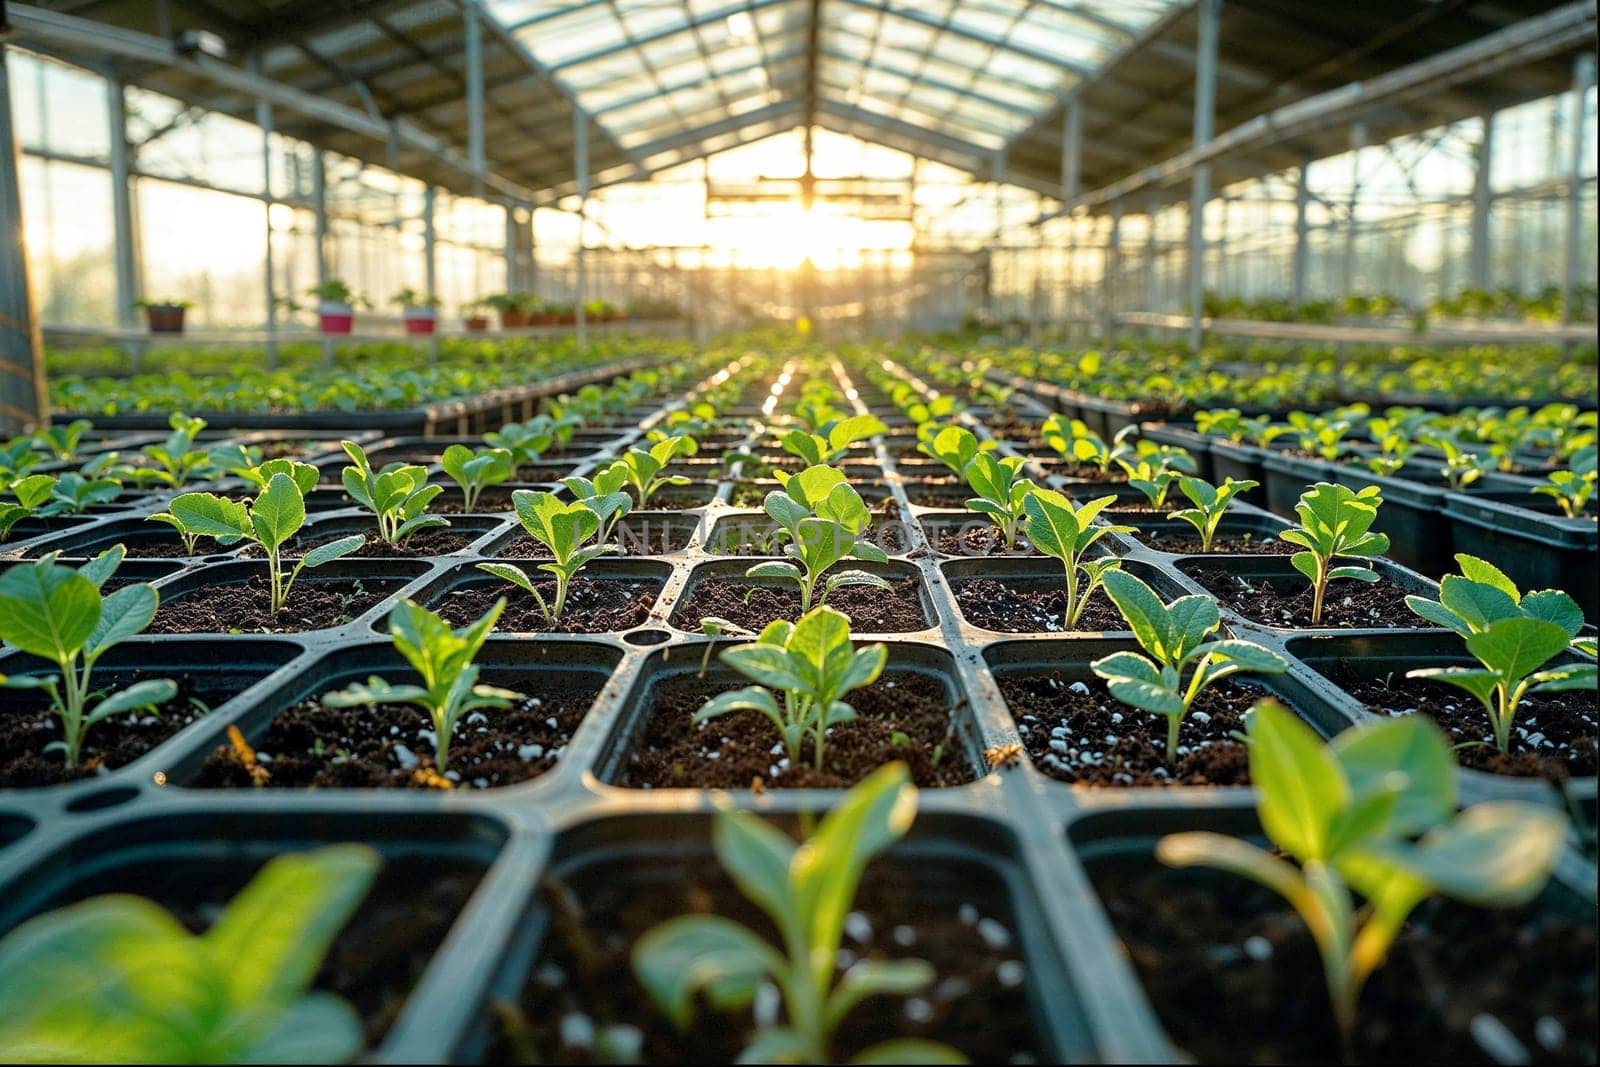 Rows of young plants in seedling trays inside a modern greenhouse, glowing under the setting suns warm light